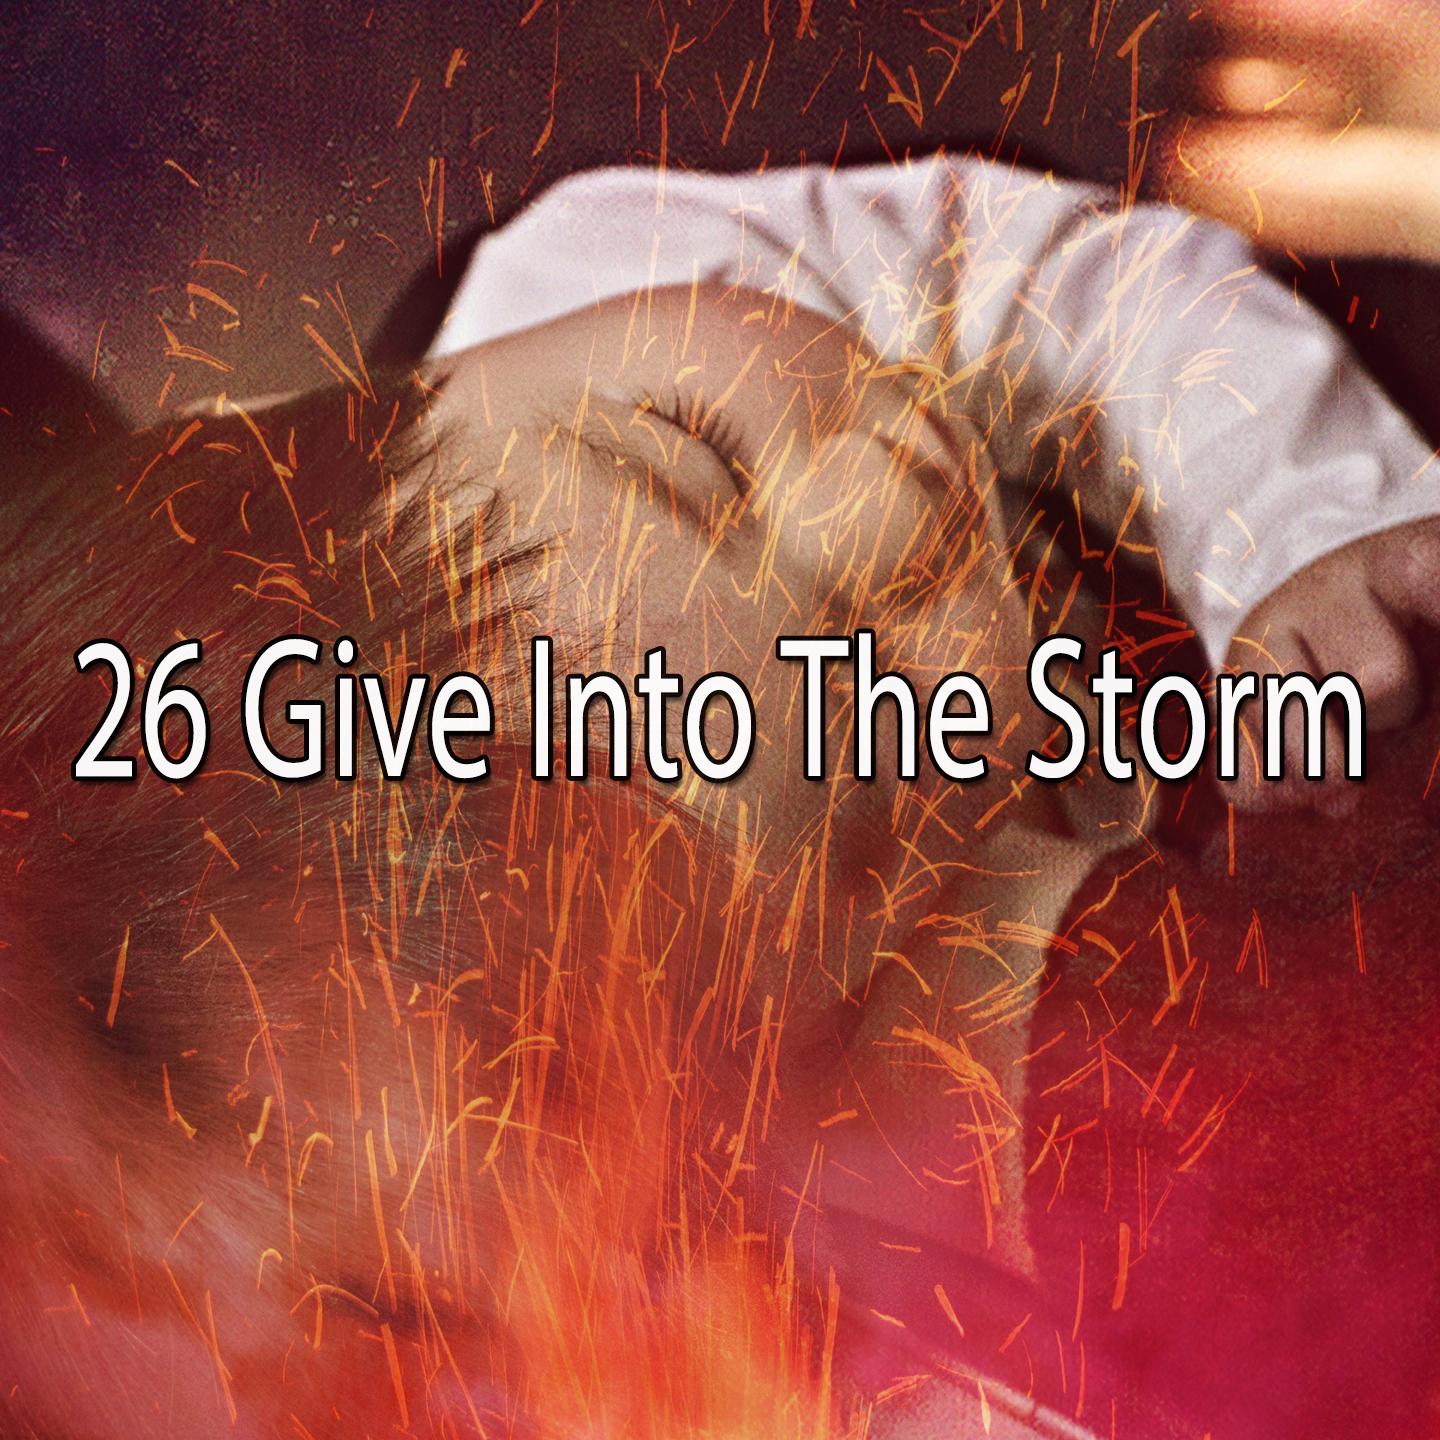 26 Give Into the Storm